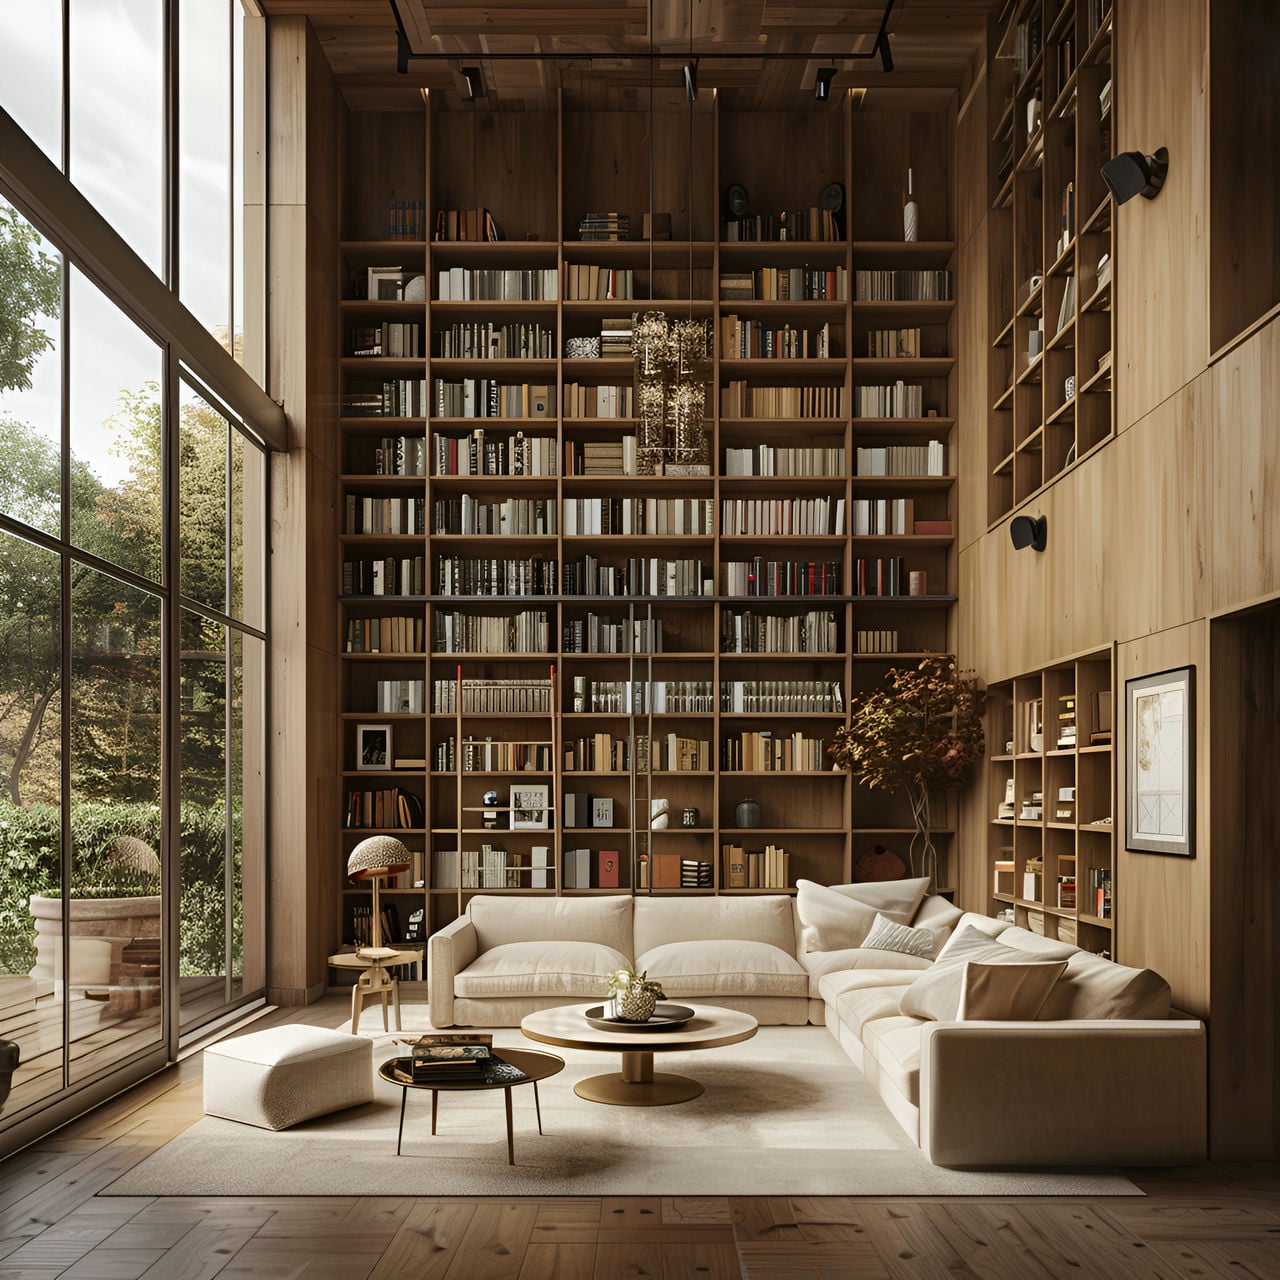 Library: size, functionality, uses, furniture and renovation